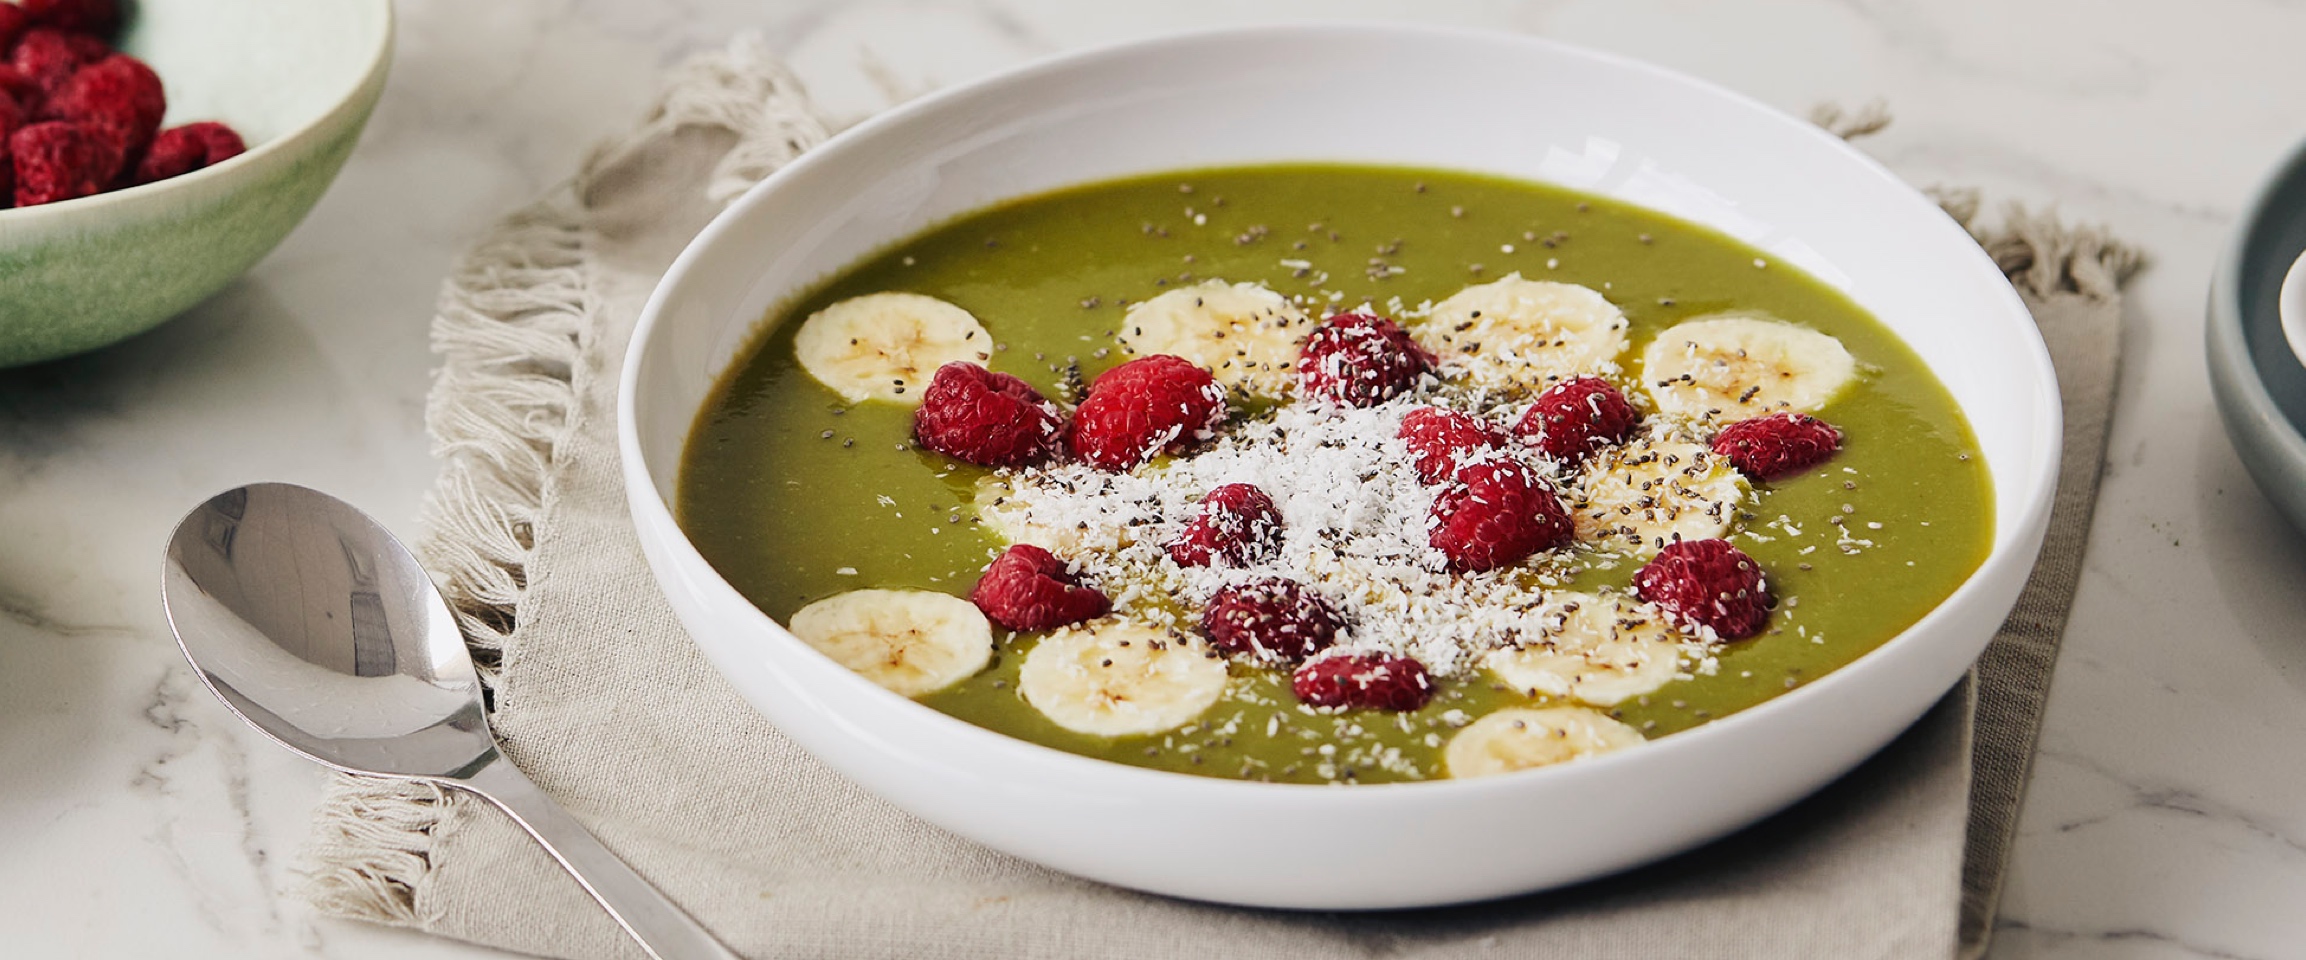 Matcha smoothie in a bowl with bananas and raspberries.